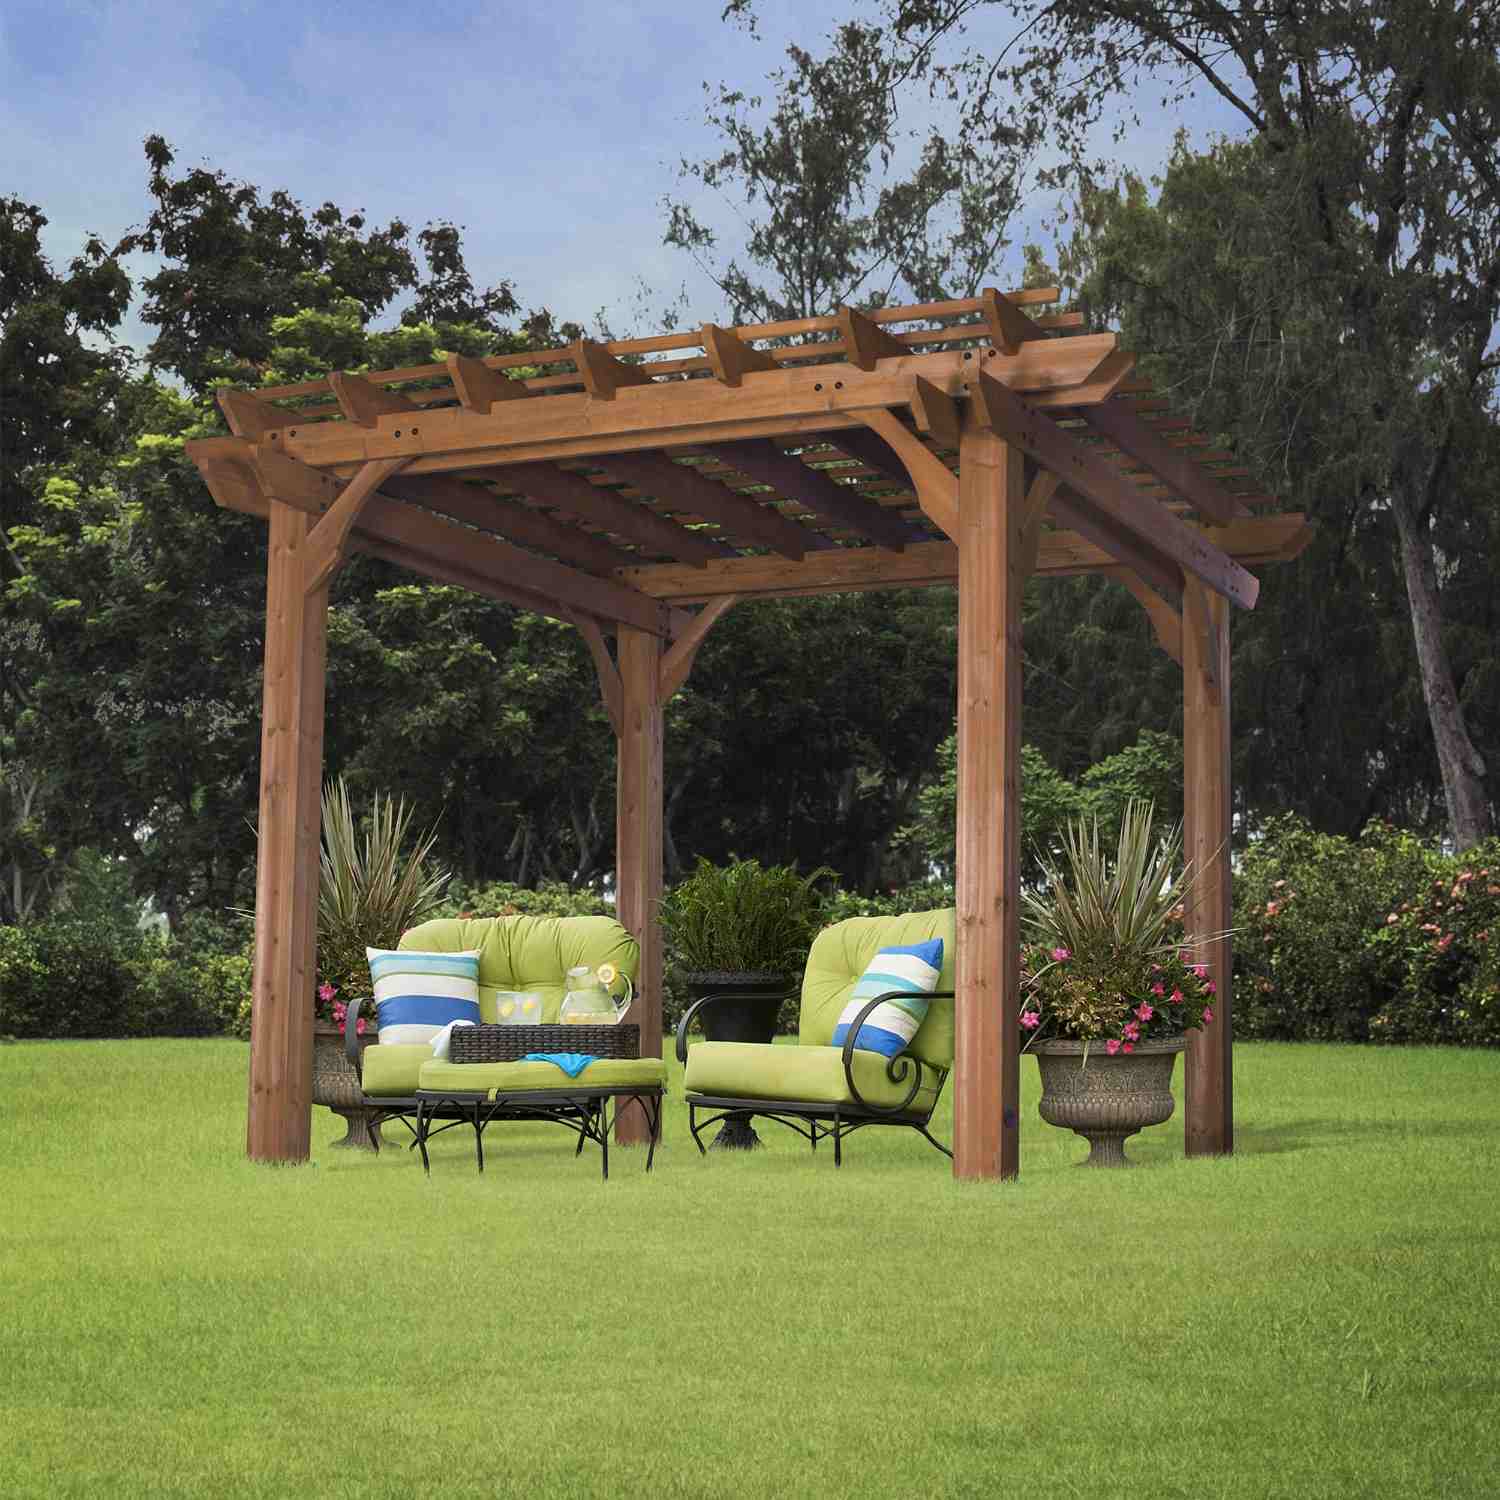 The Top Rated Pergolas and Kits to Buy